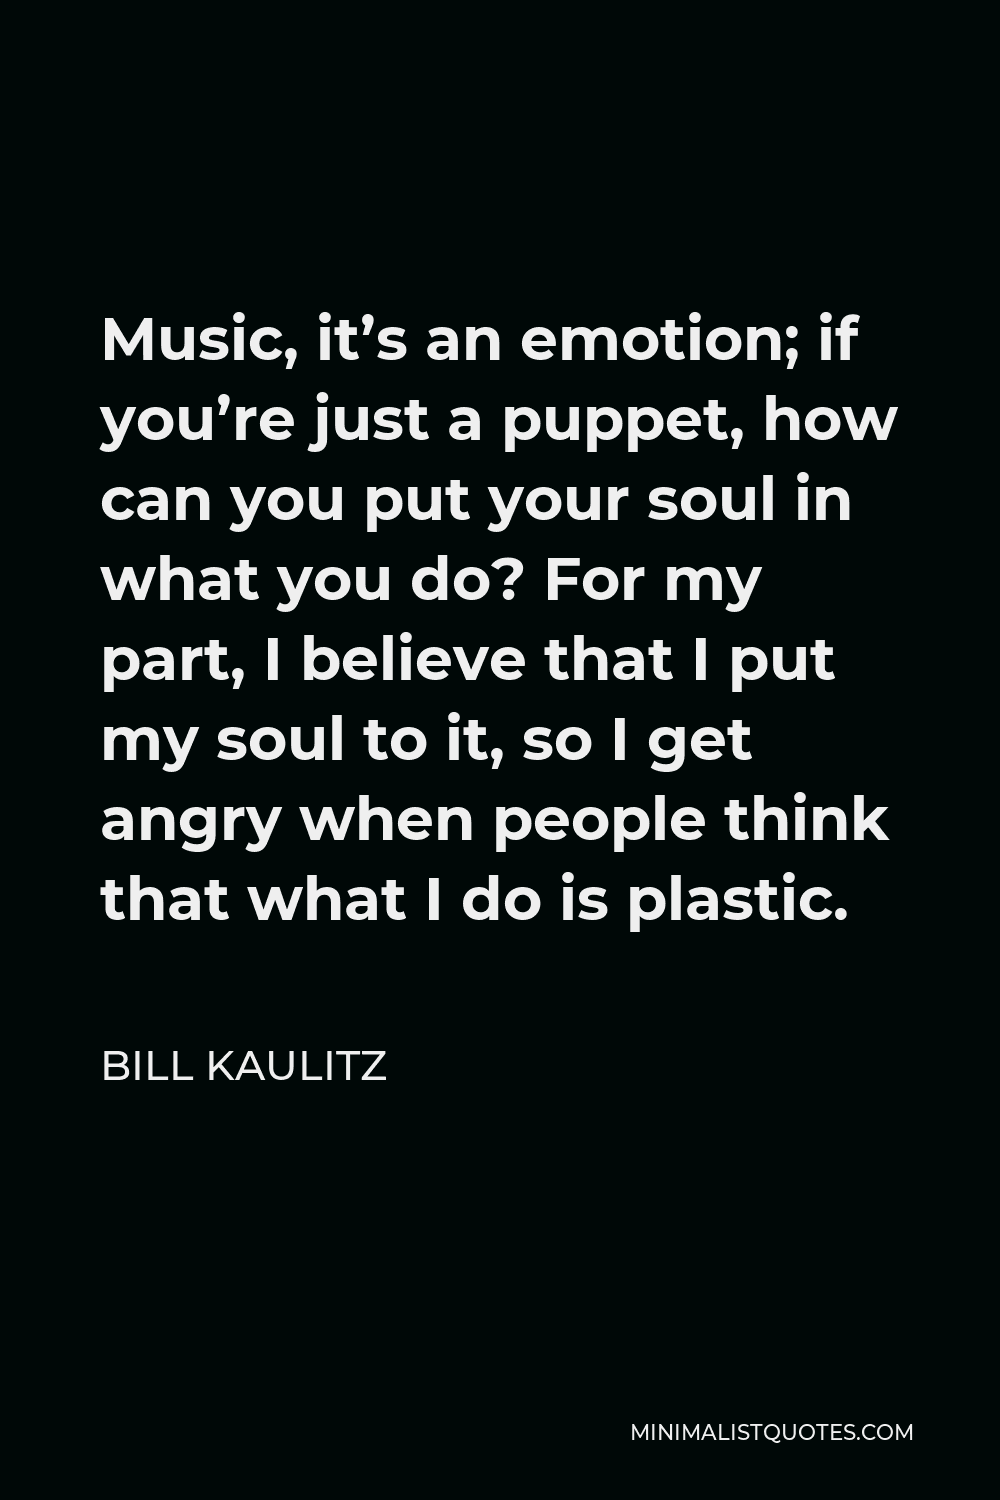 Bill Kaulitz Quote - Music, it’s an emotion; if you’re just a puppet, how can you put your soul in what you do? For my part, I believe that I put my soul to it, so I get angry when people think that what I do is plastic.